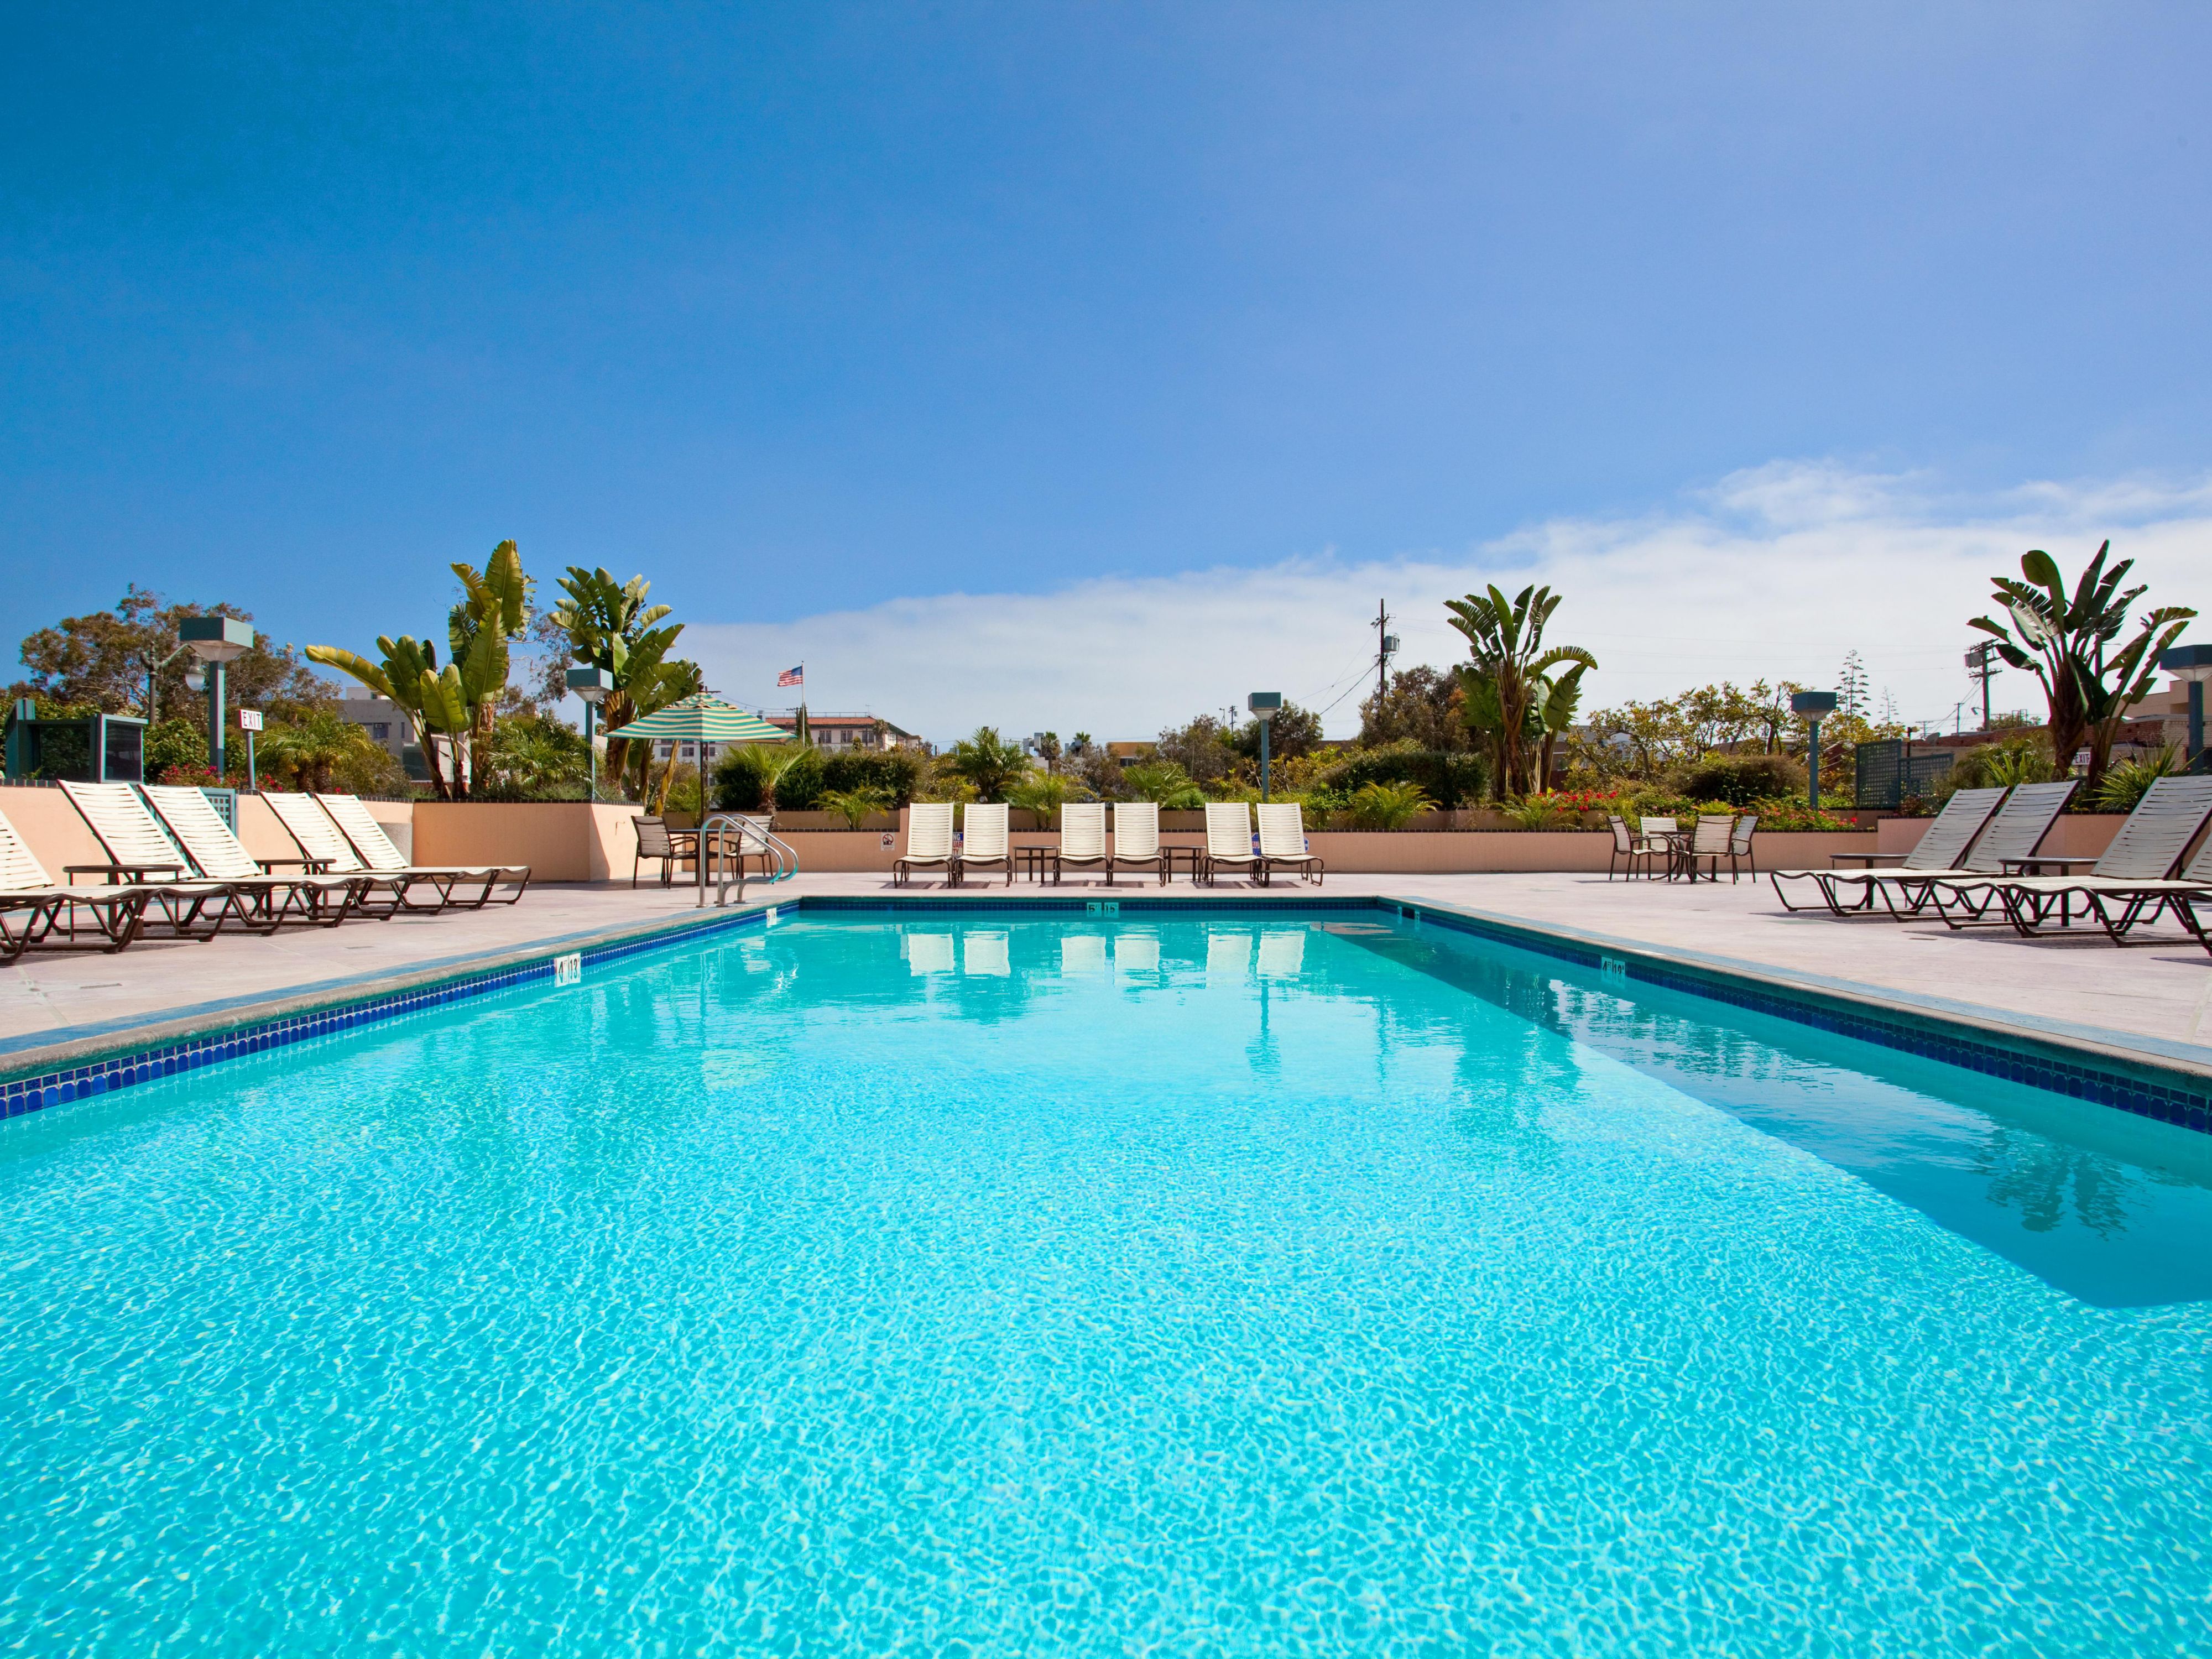 Crowne Plaza® Los Angeles Harbor offers a resort-style outdoor saline pool and hot tub on our second floor. Lounge on the sun deck with views of the sparkling Los Angeles Harbor. 